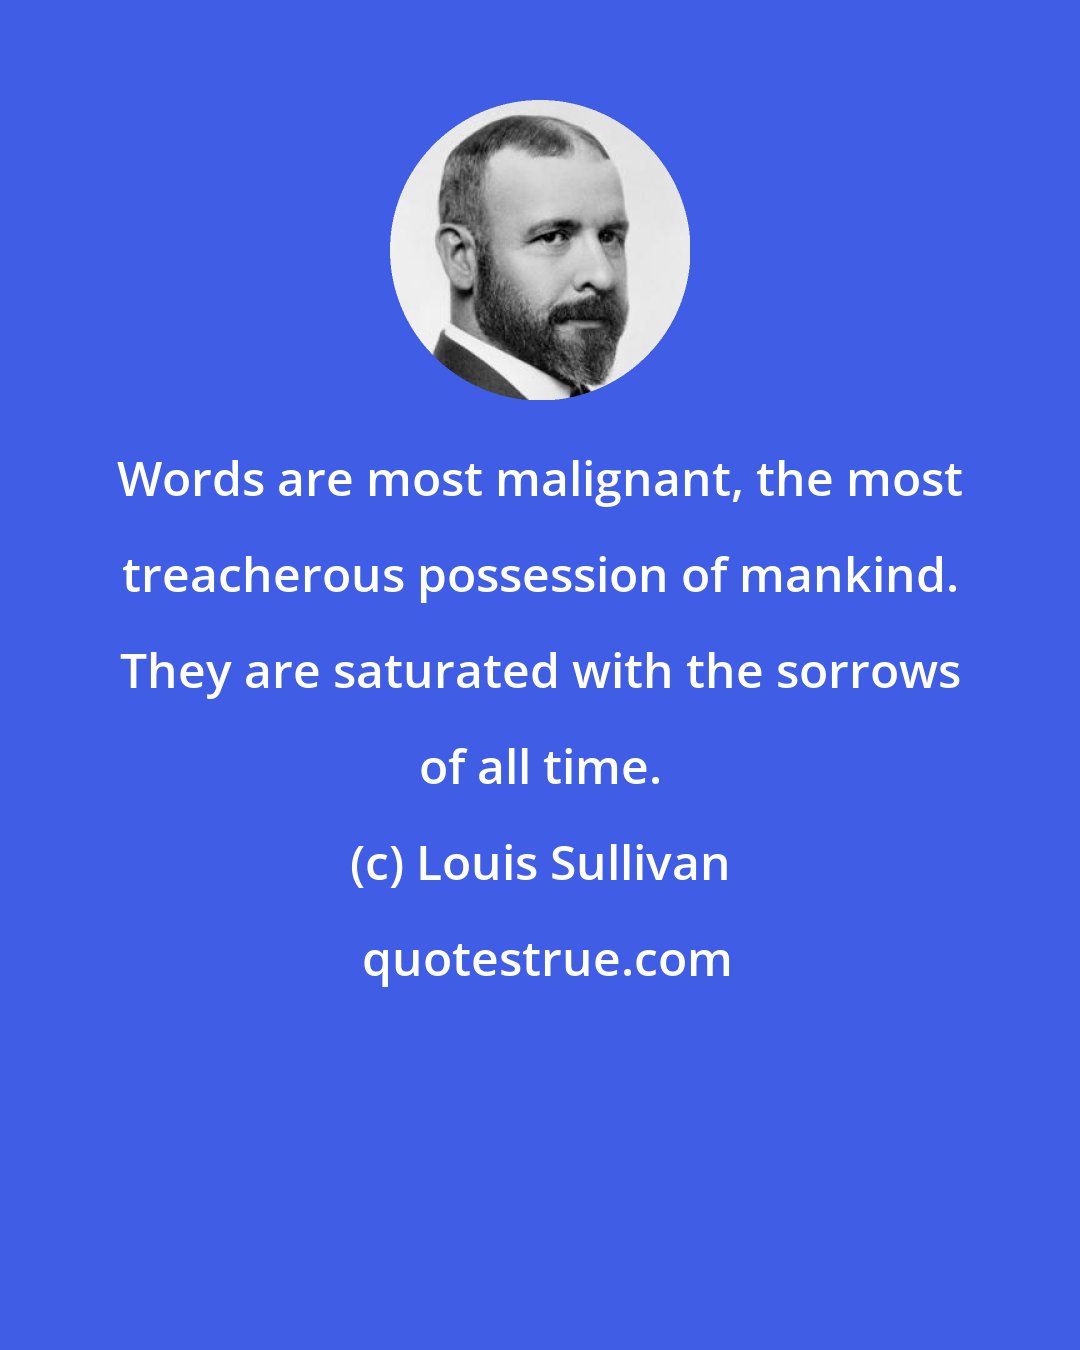 Louis Sullivan: Words are most malignant, the most treacherous possession of mankind. They are saturated with the sorrows of all time.